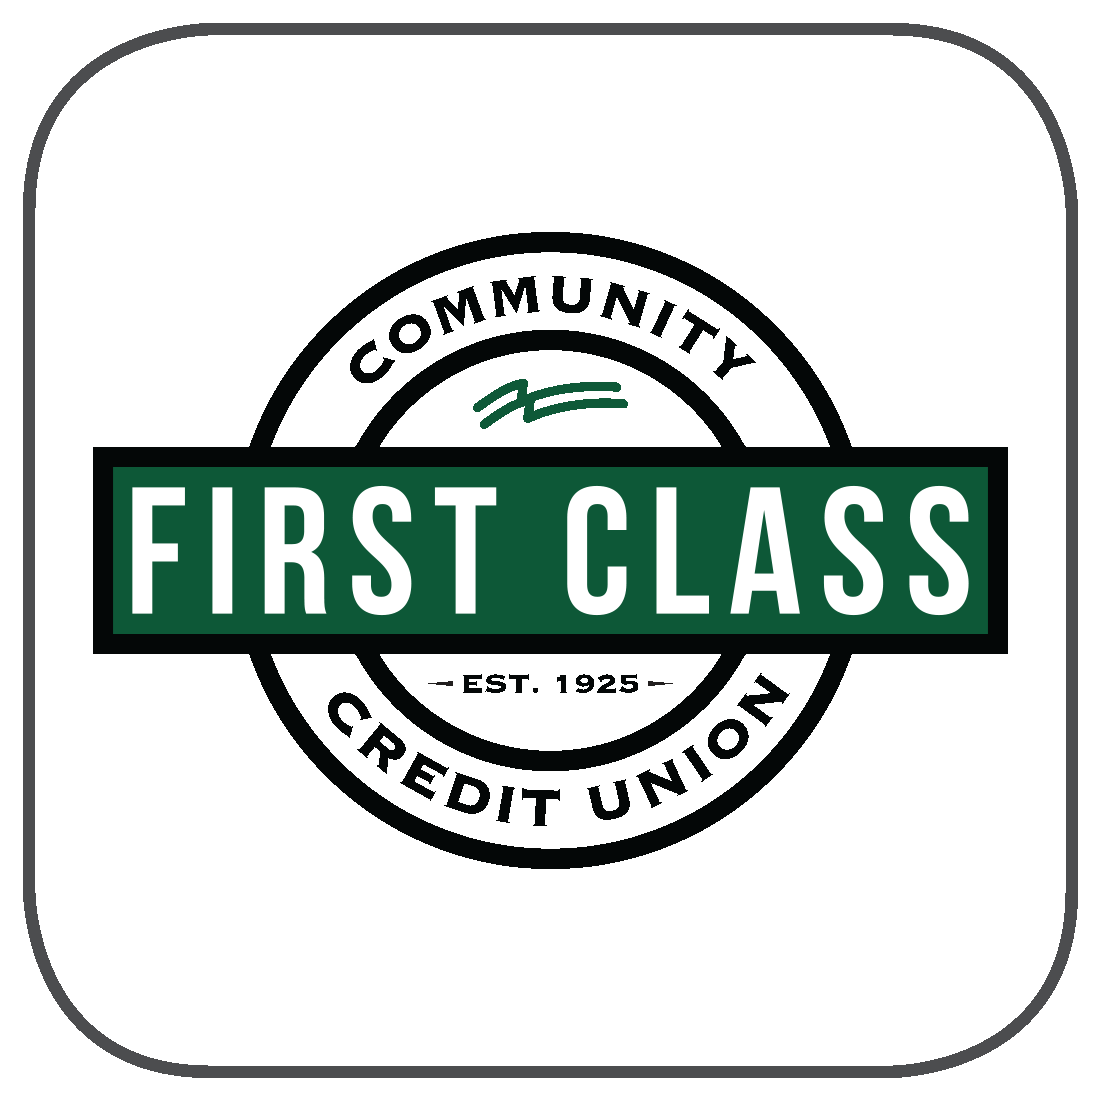 Mobile Services : First Class Community Credit Union